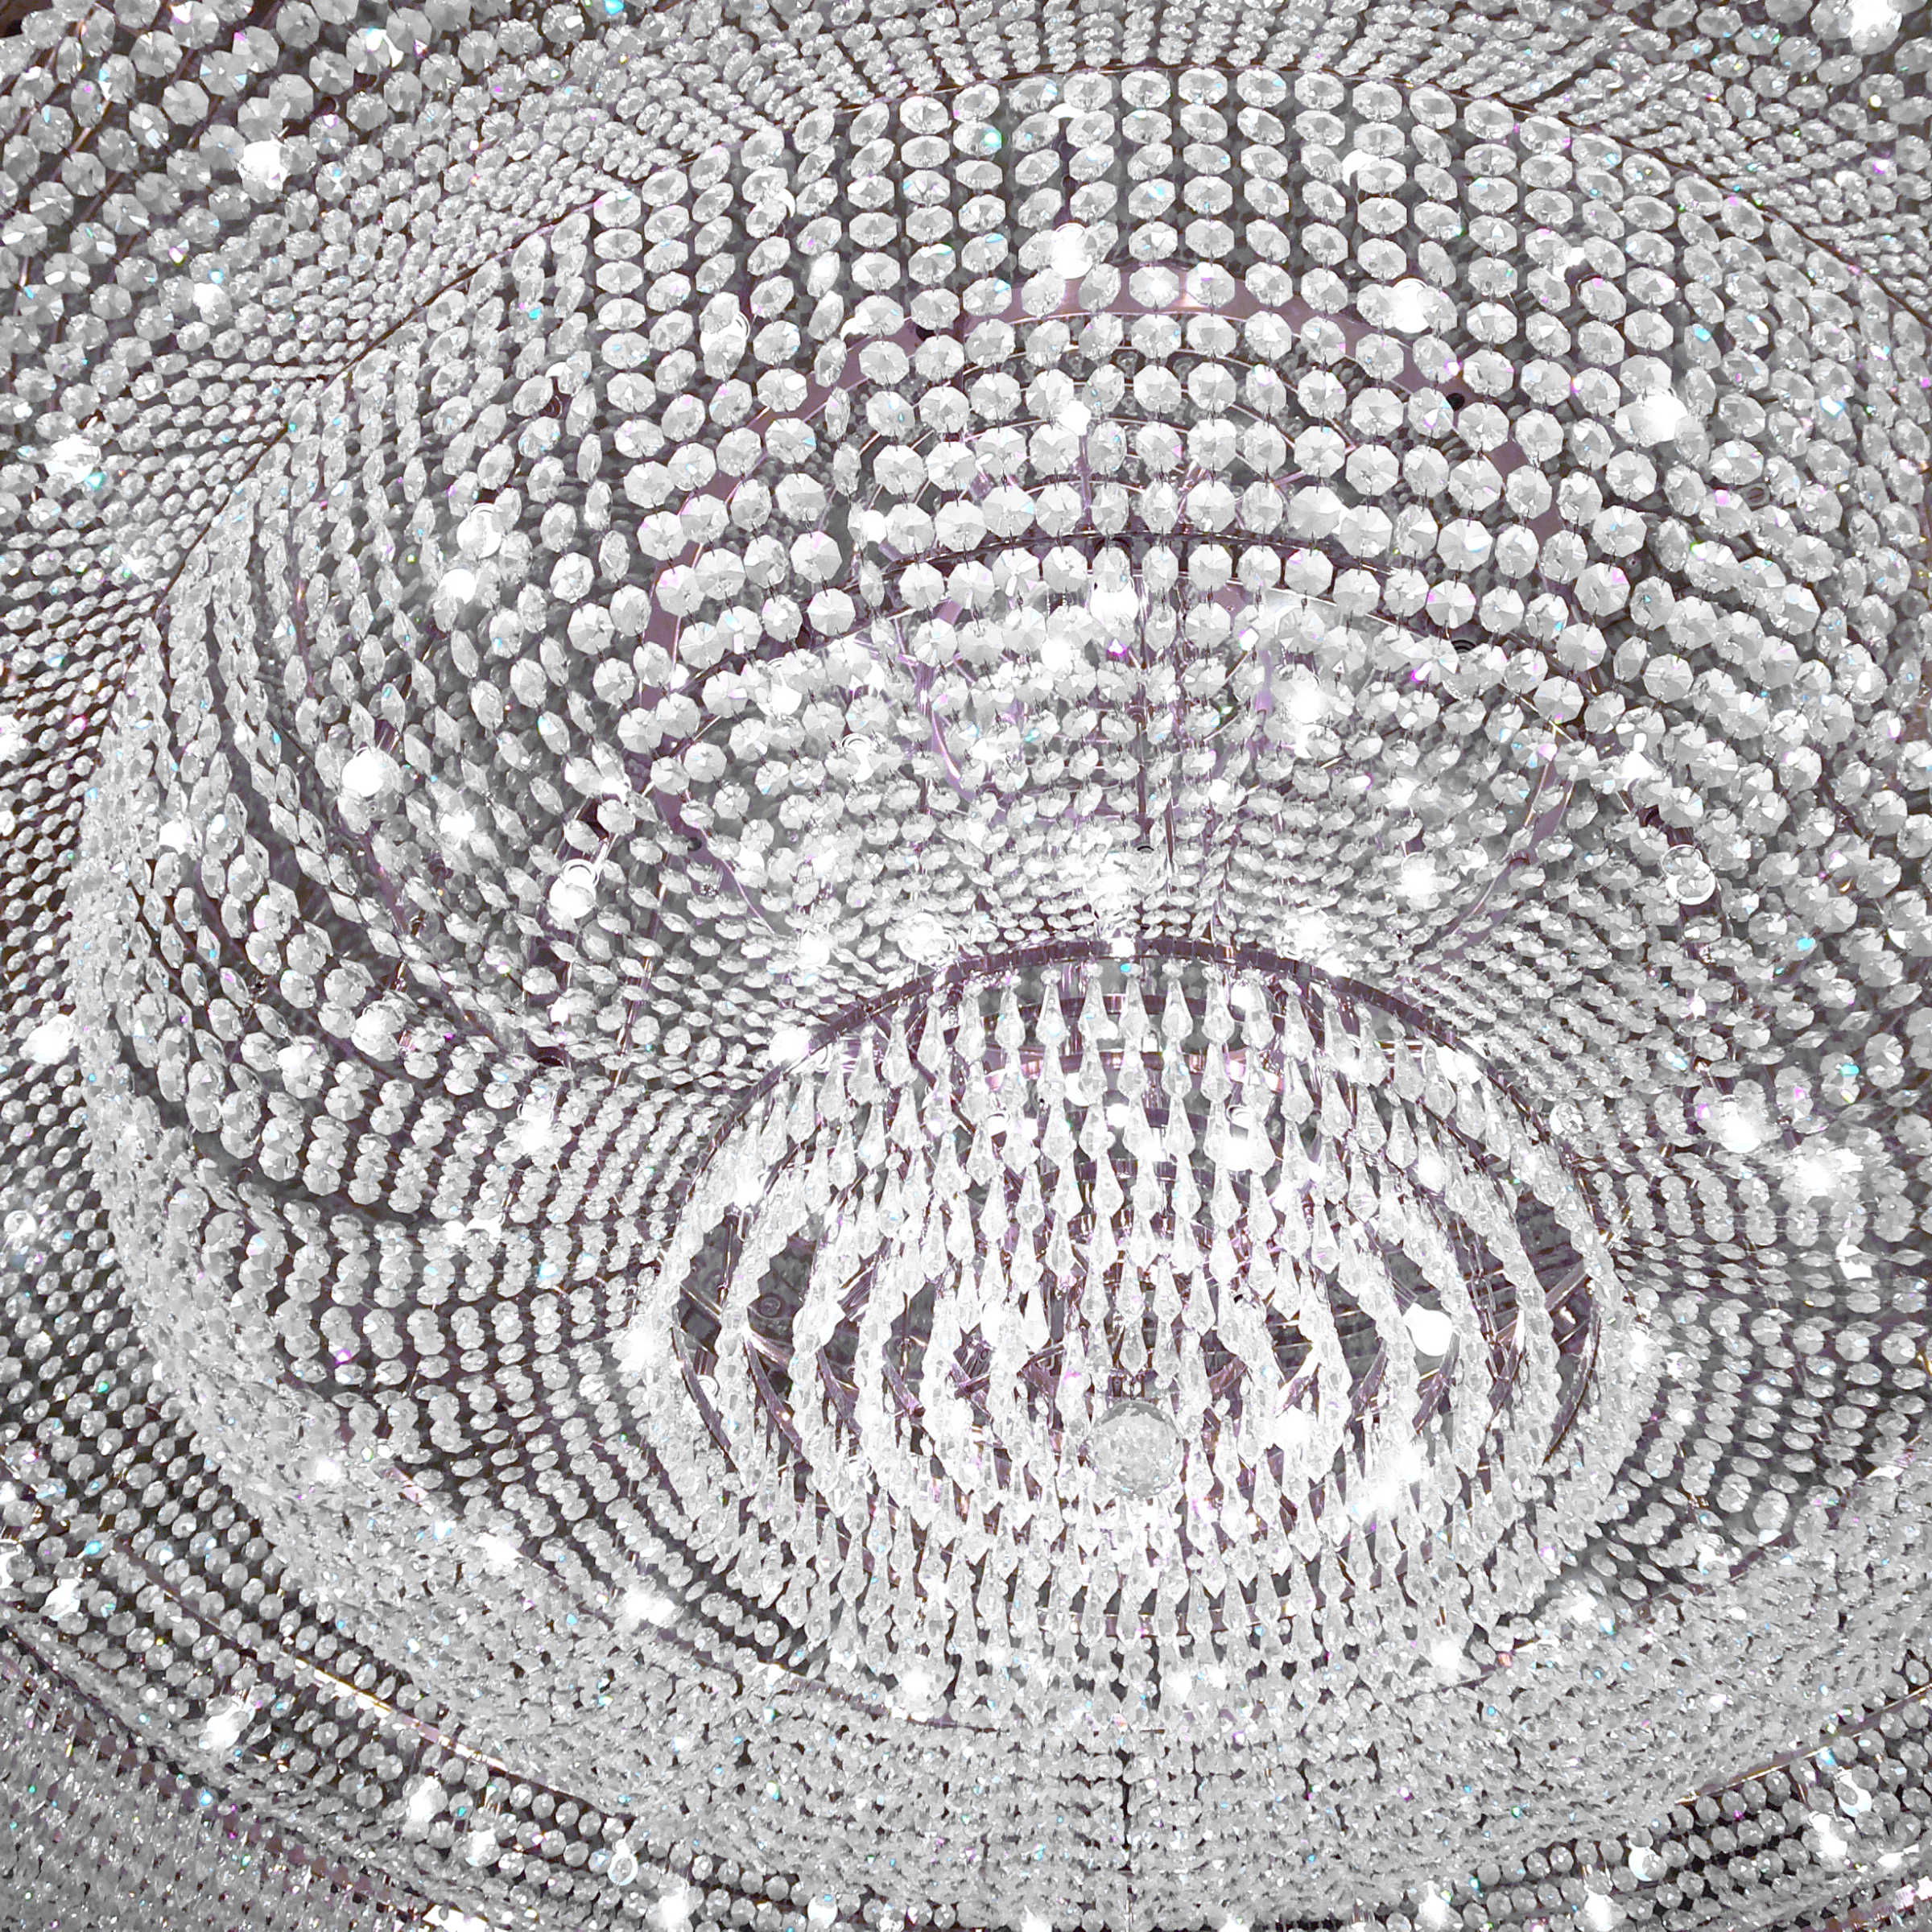 A large chandelier with thousands of keys.